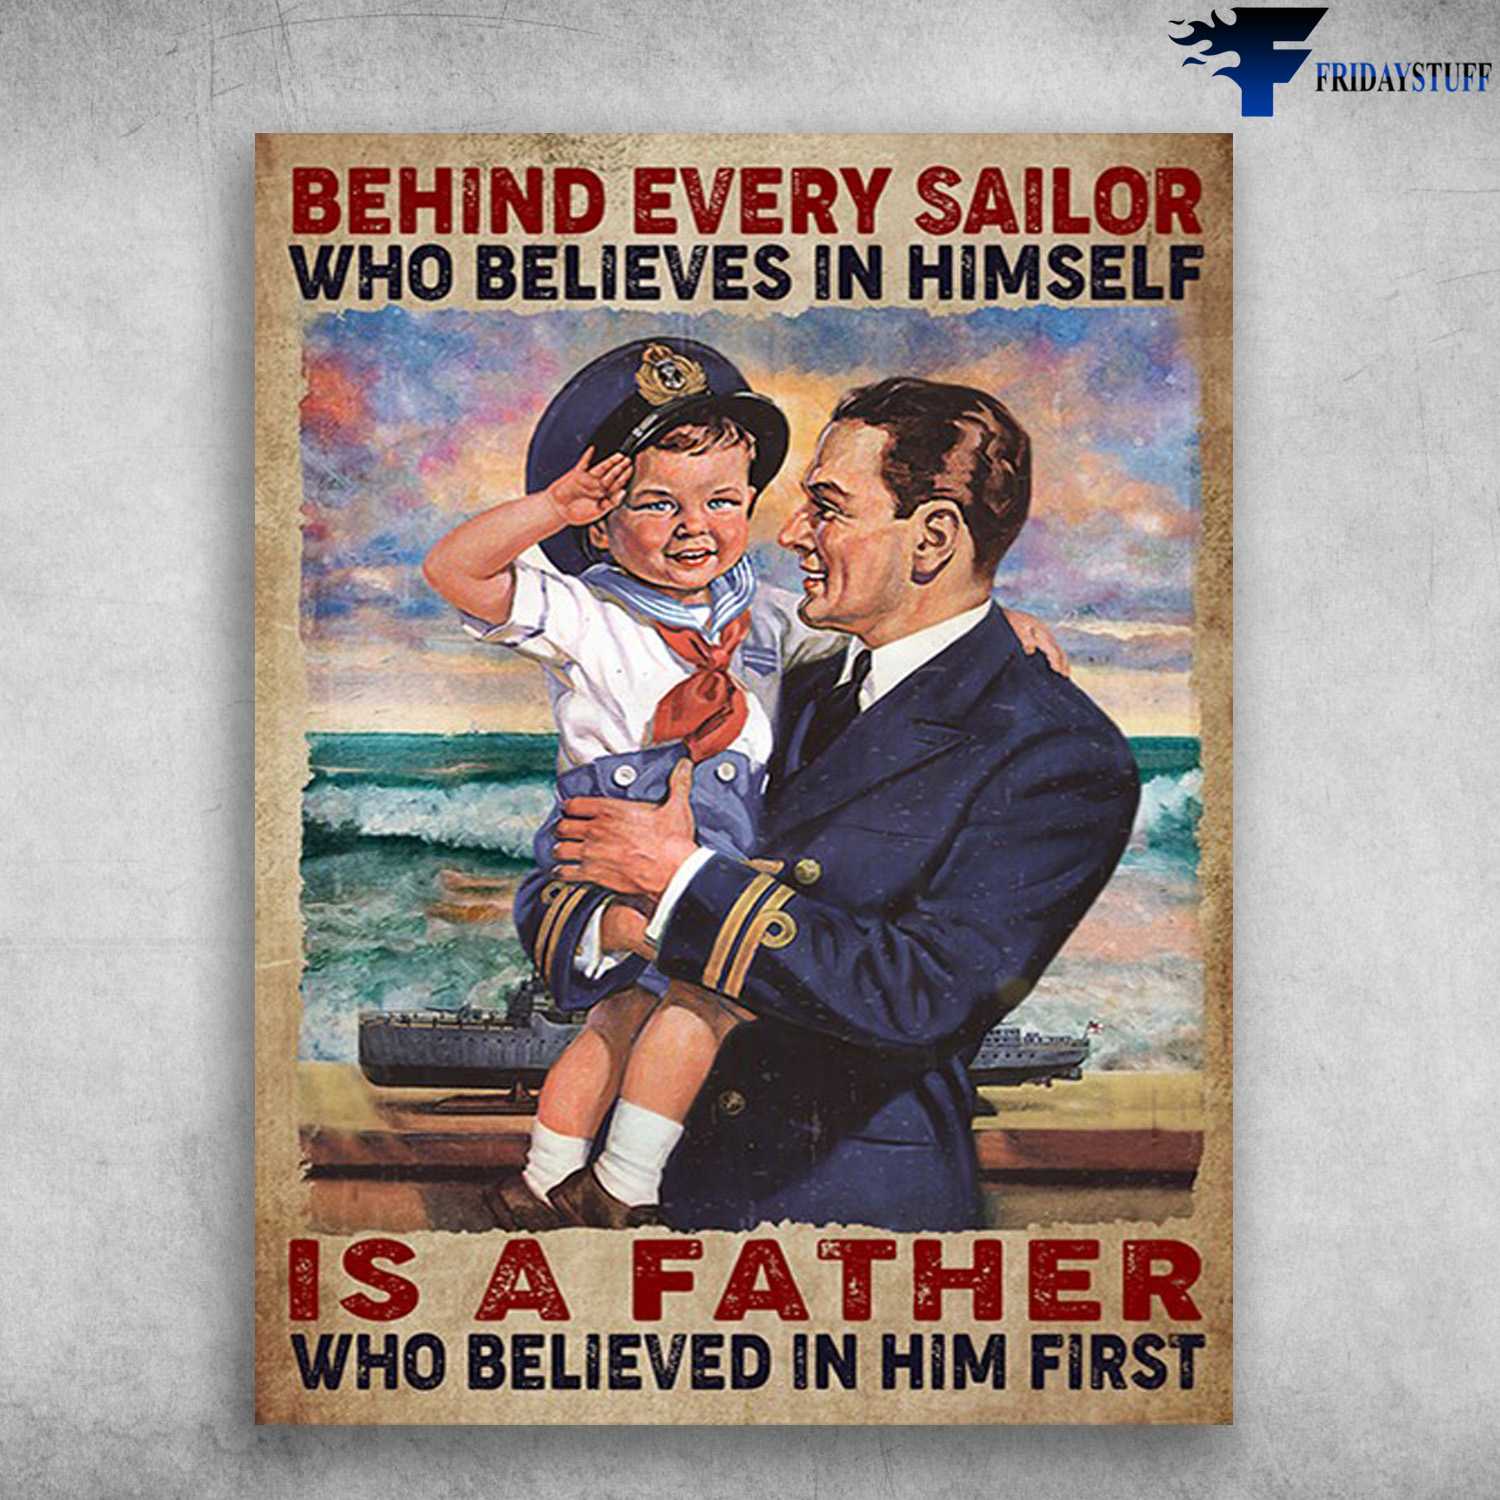 Sailor Poster, Father And Son - Behind Every Sailor Who Believes In Himself, Is A Father, Who Believed In Him First